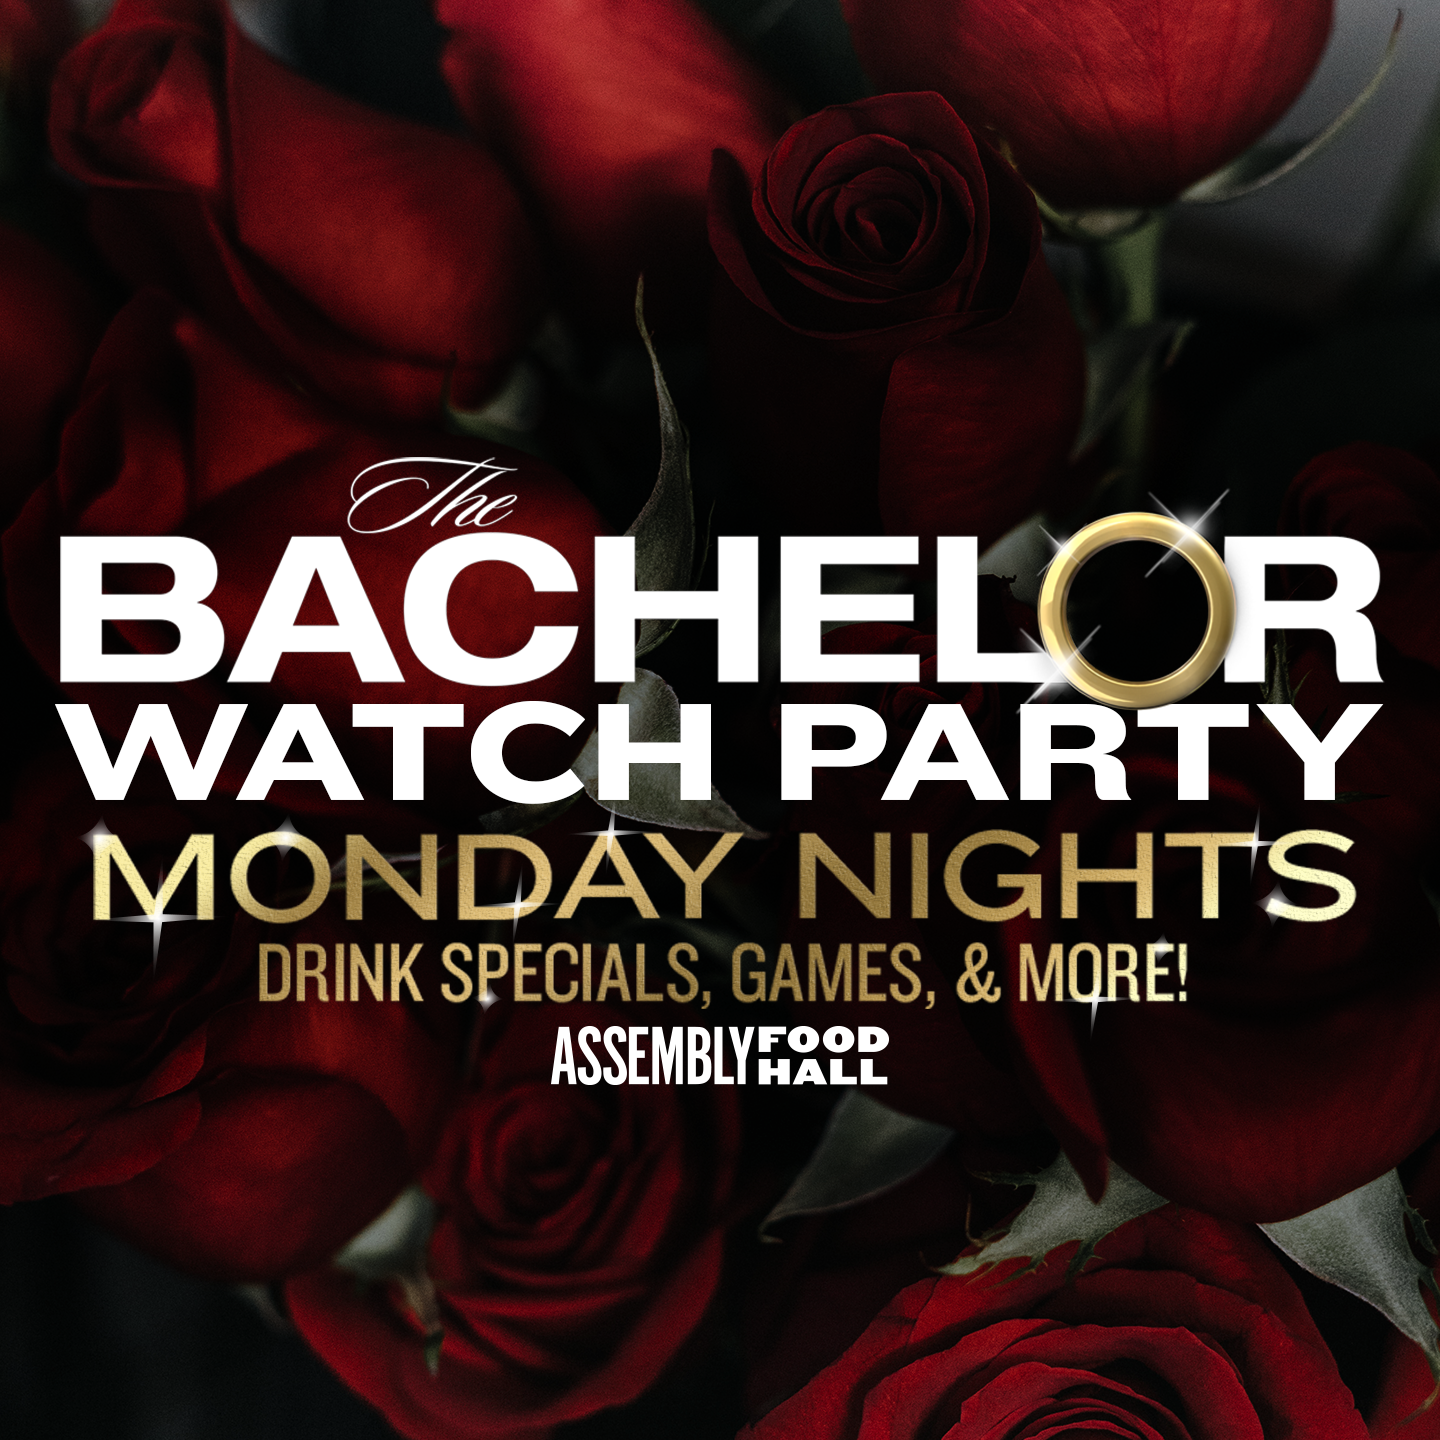 Promo image of The Bachelor Watch Party